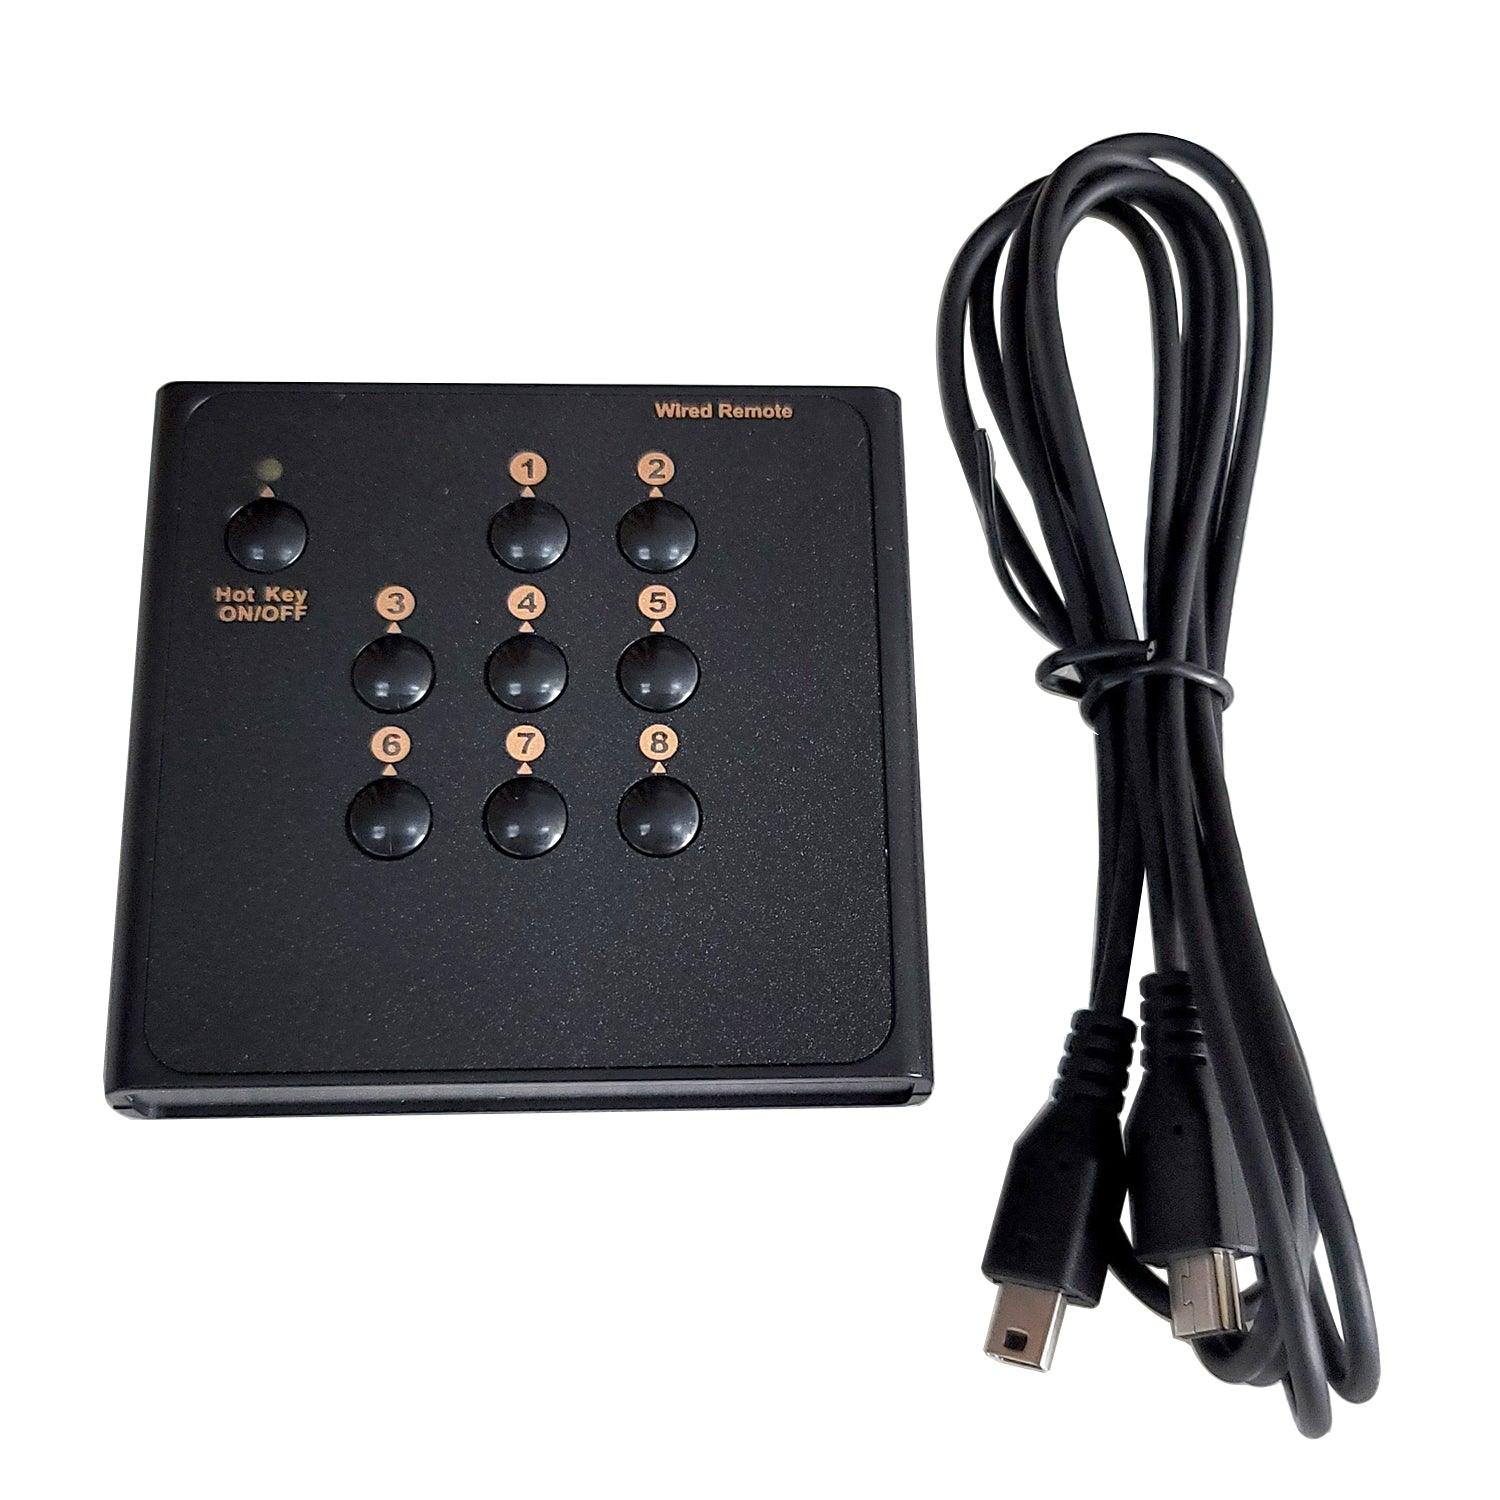 Replacement Wired Remoter Toggle Switcher for CKL Dual Monitor KVM Switches 8 Port - CKL KVM Switches